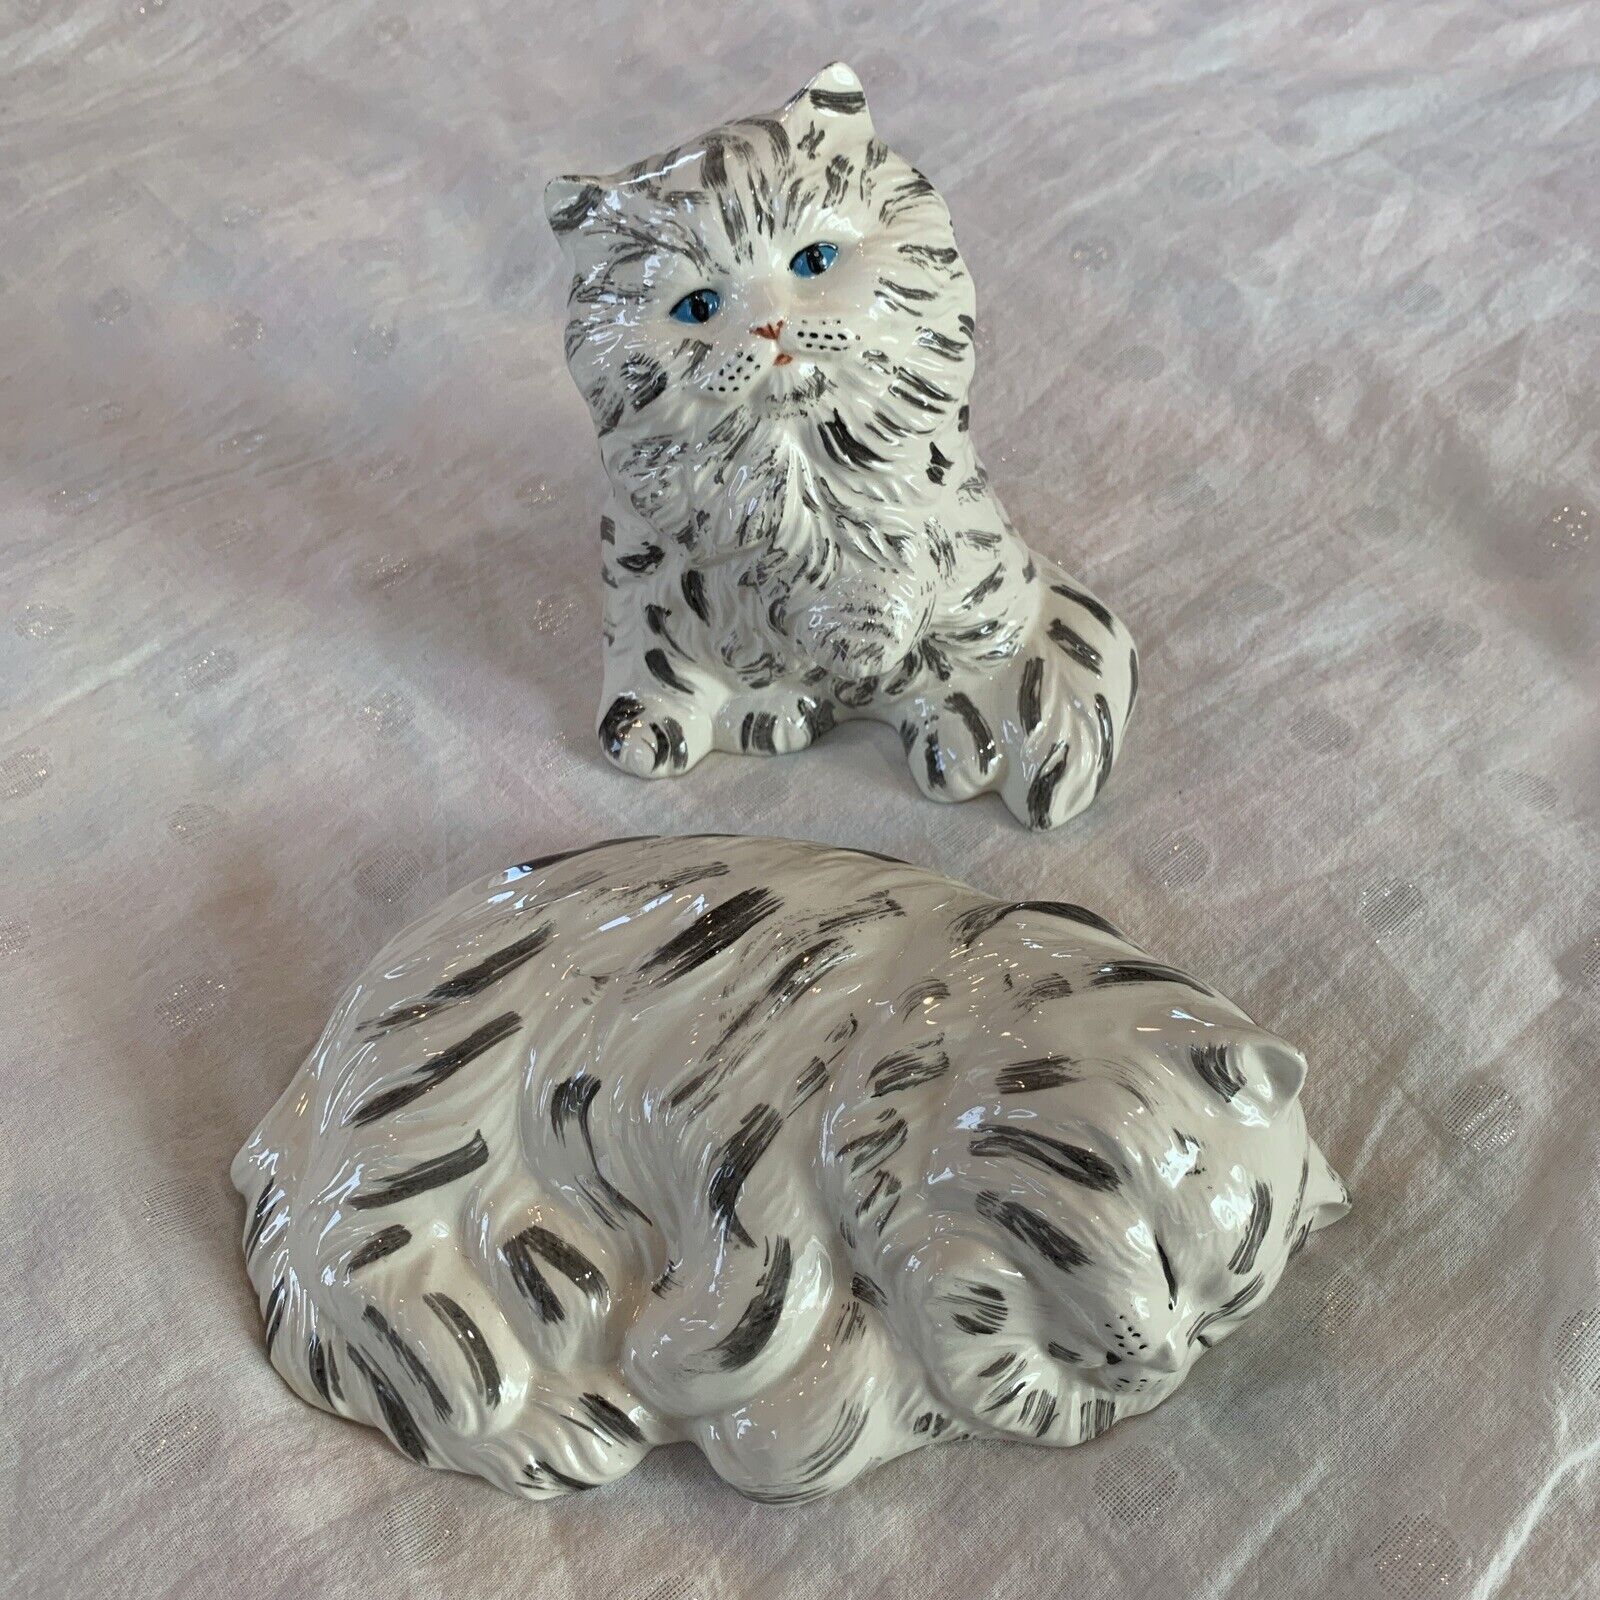 Vintage Hobby Art Ceramic Cats Hand Painted Cute